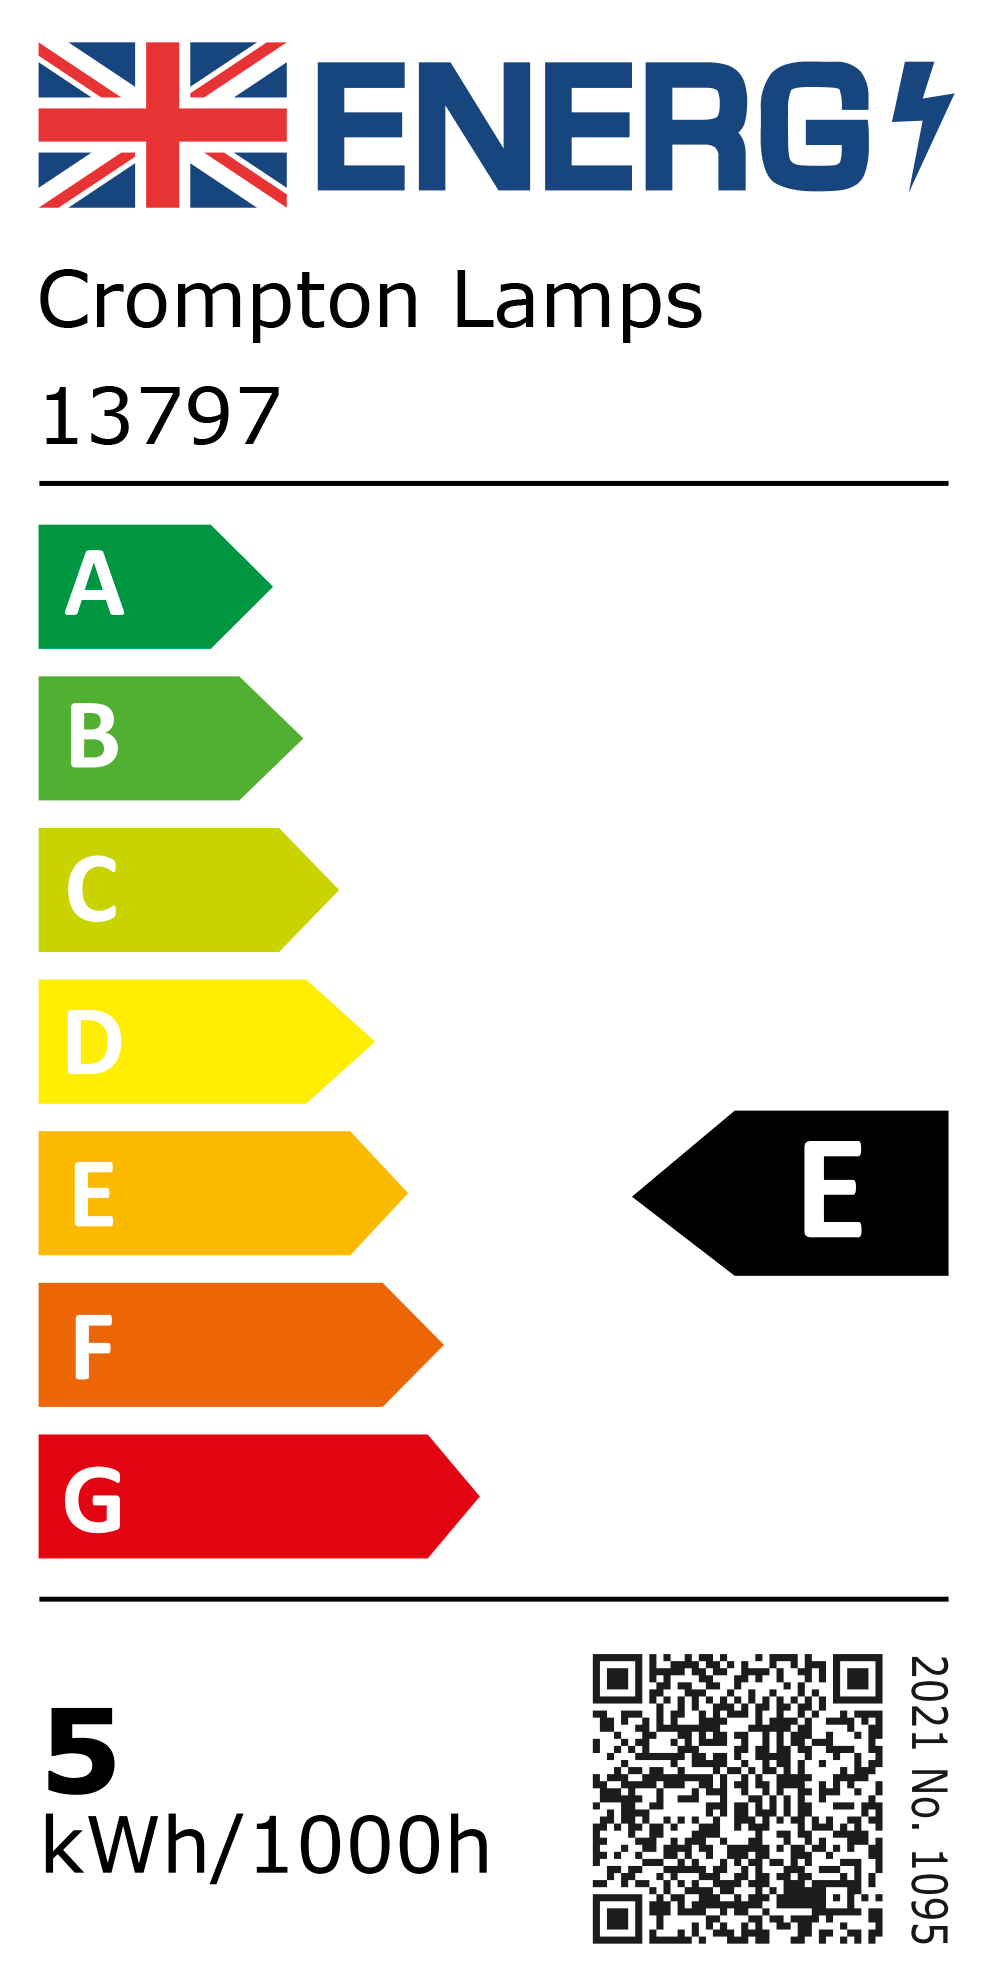 New 2021 Energy Rating Label: Stock Code 13797